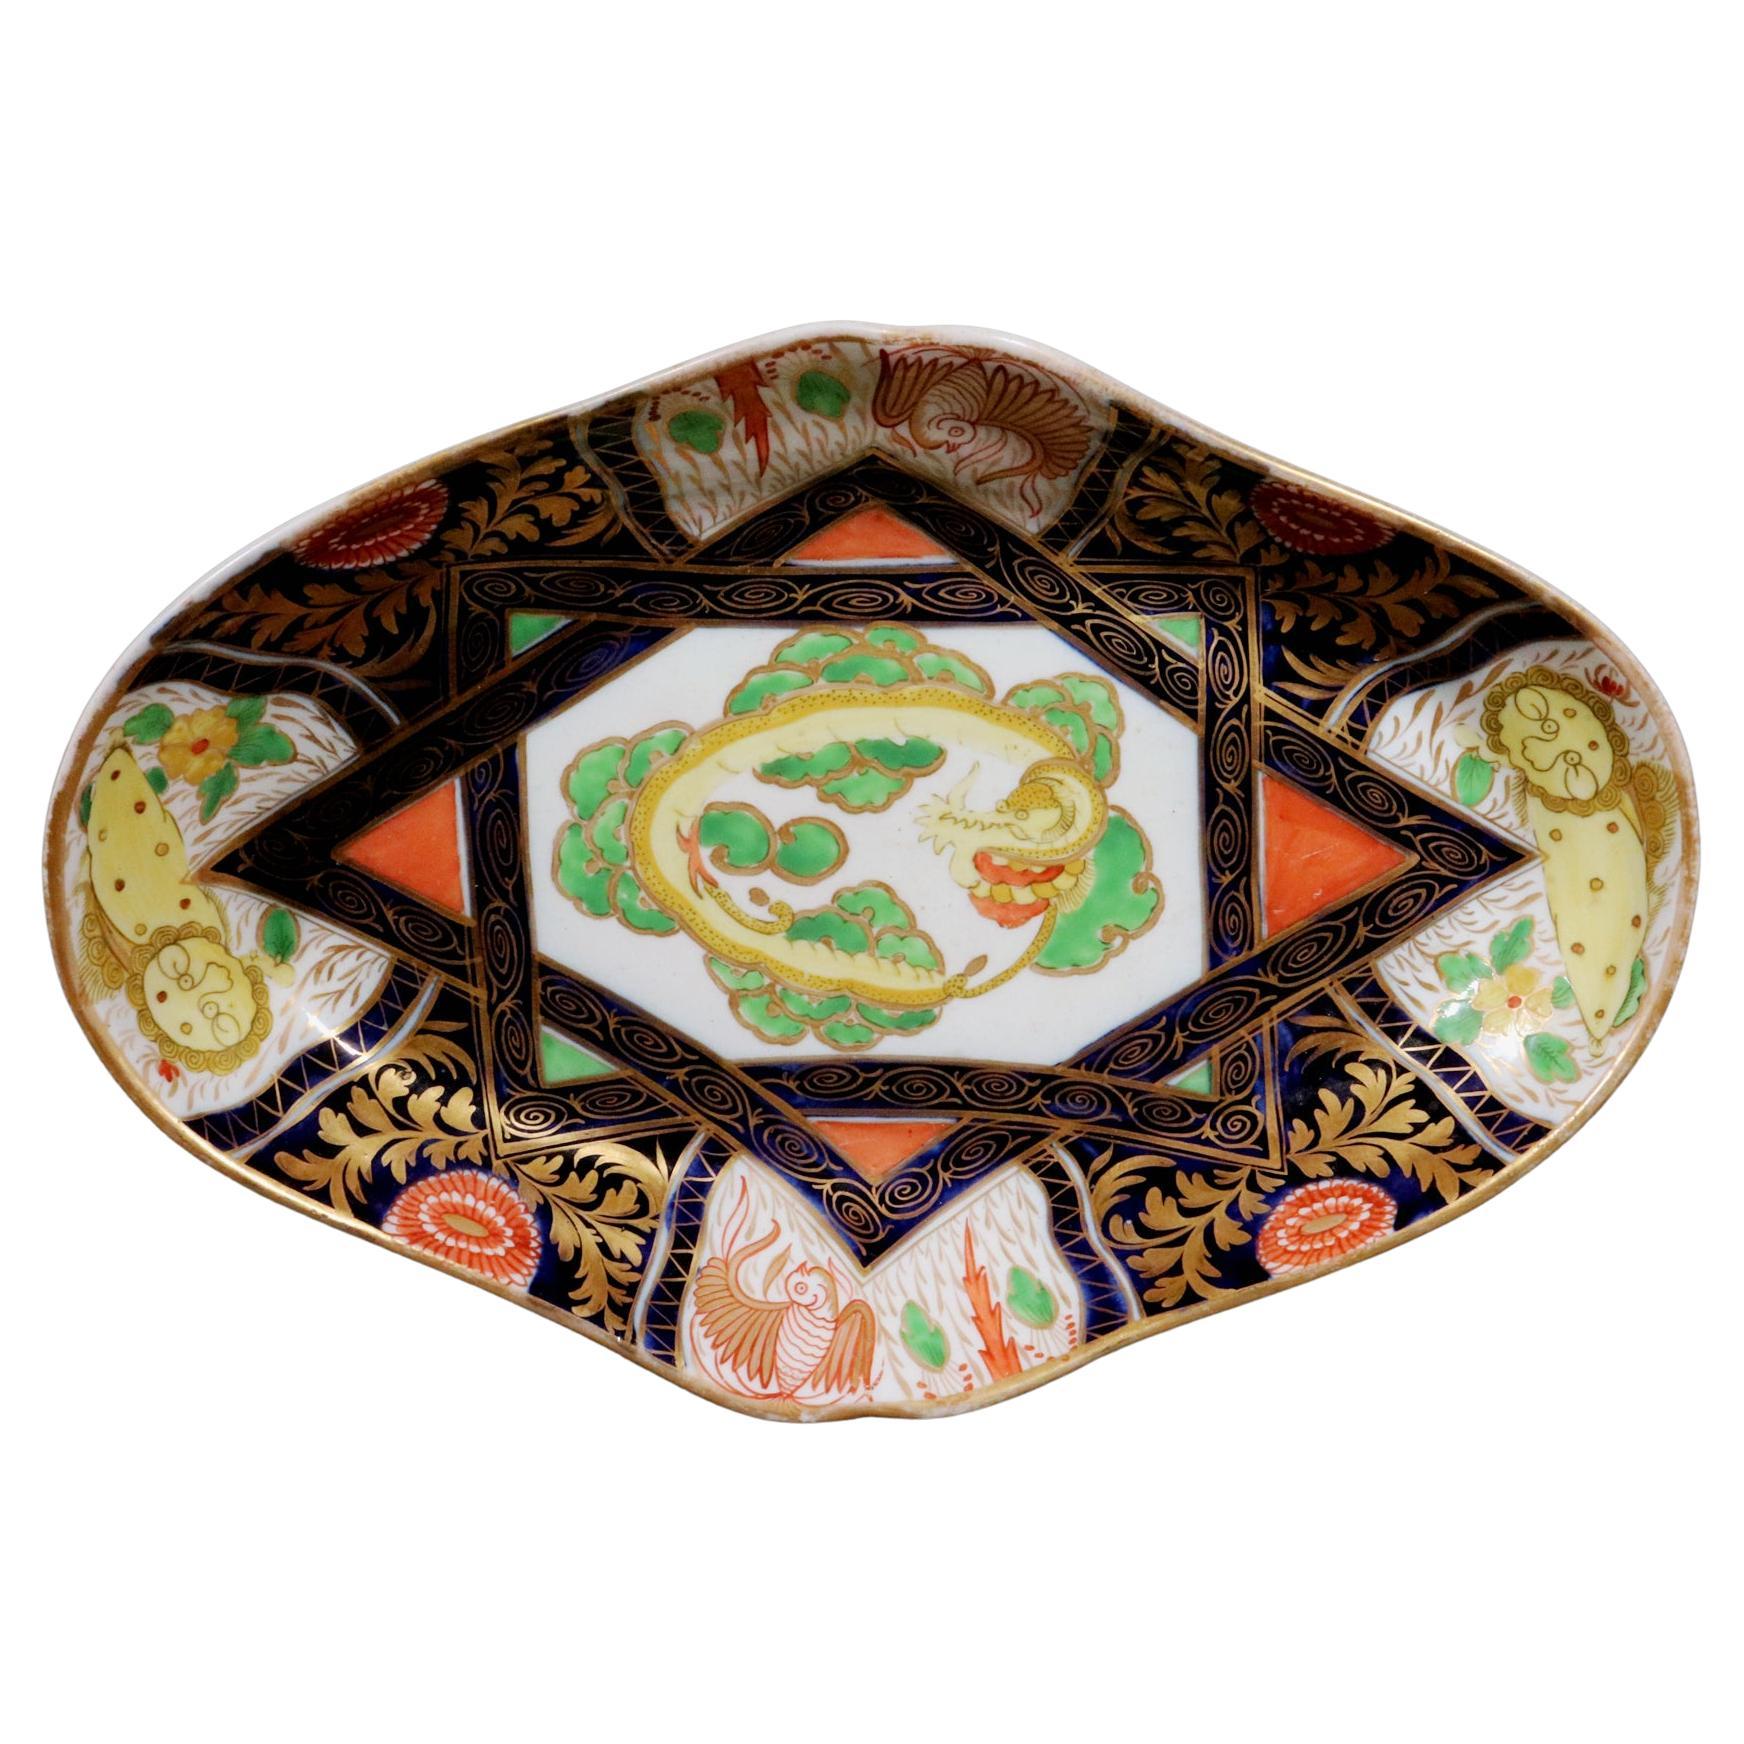 Coalport Porcelain Chinoiserie Dish with Yellow Dragon
Circa 1805-10

The Coalport porcelain shaped oval dish is painted in an Imari coloration with the center depicting a yellow dragon with green scales.  This has a double border of mazarine blue